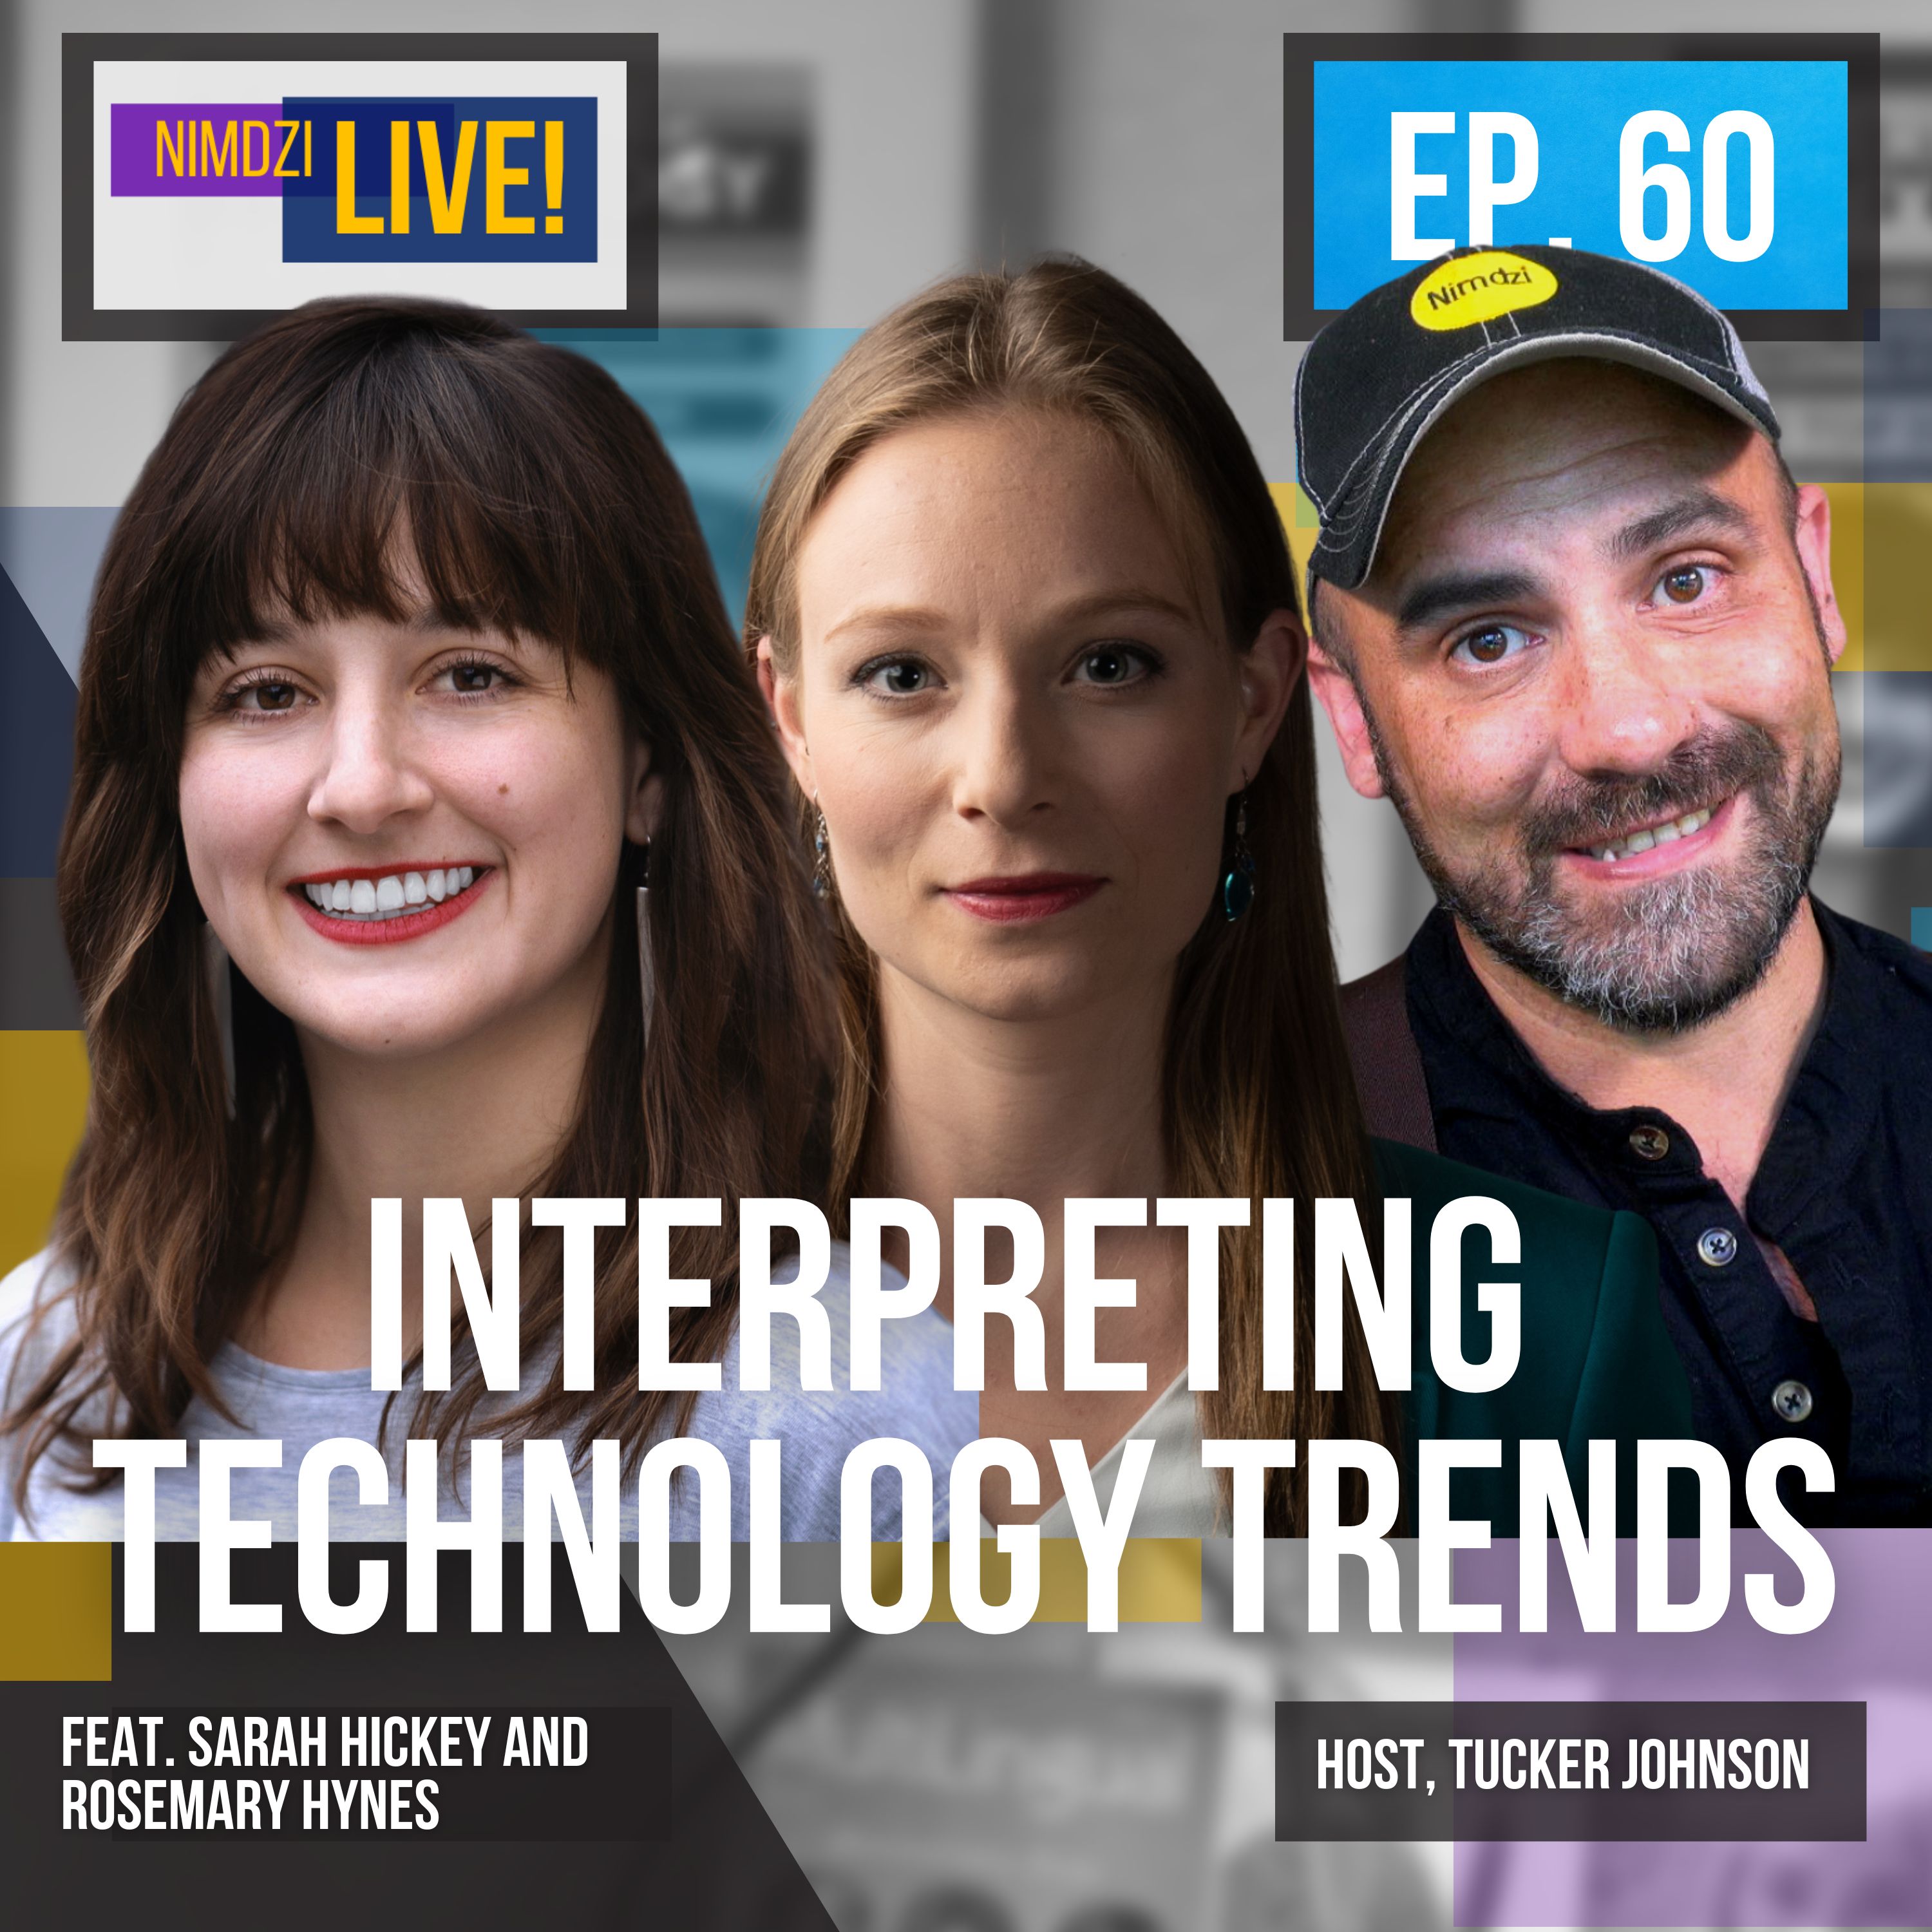 Interpreting Technology Trends (feat. Sarah Hickey and Rosemary Hynes)